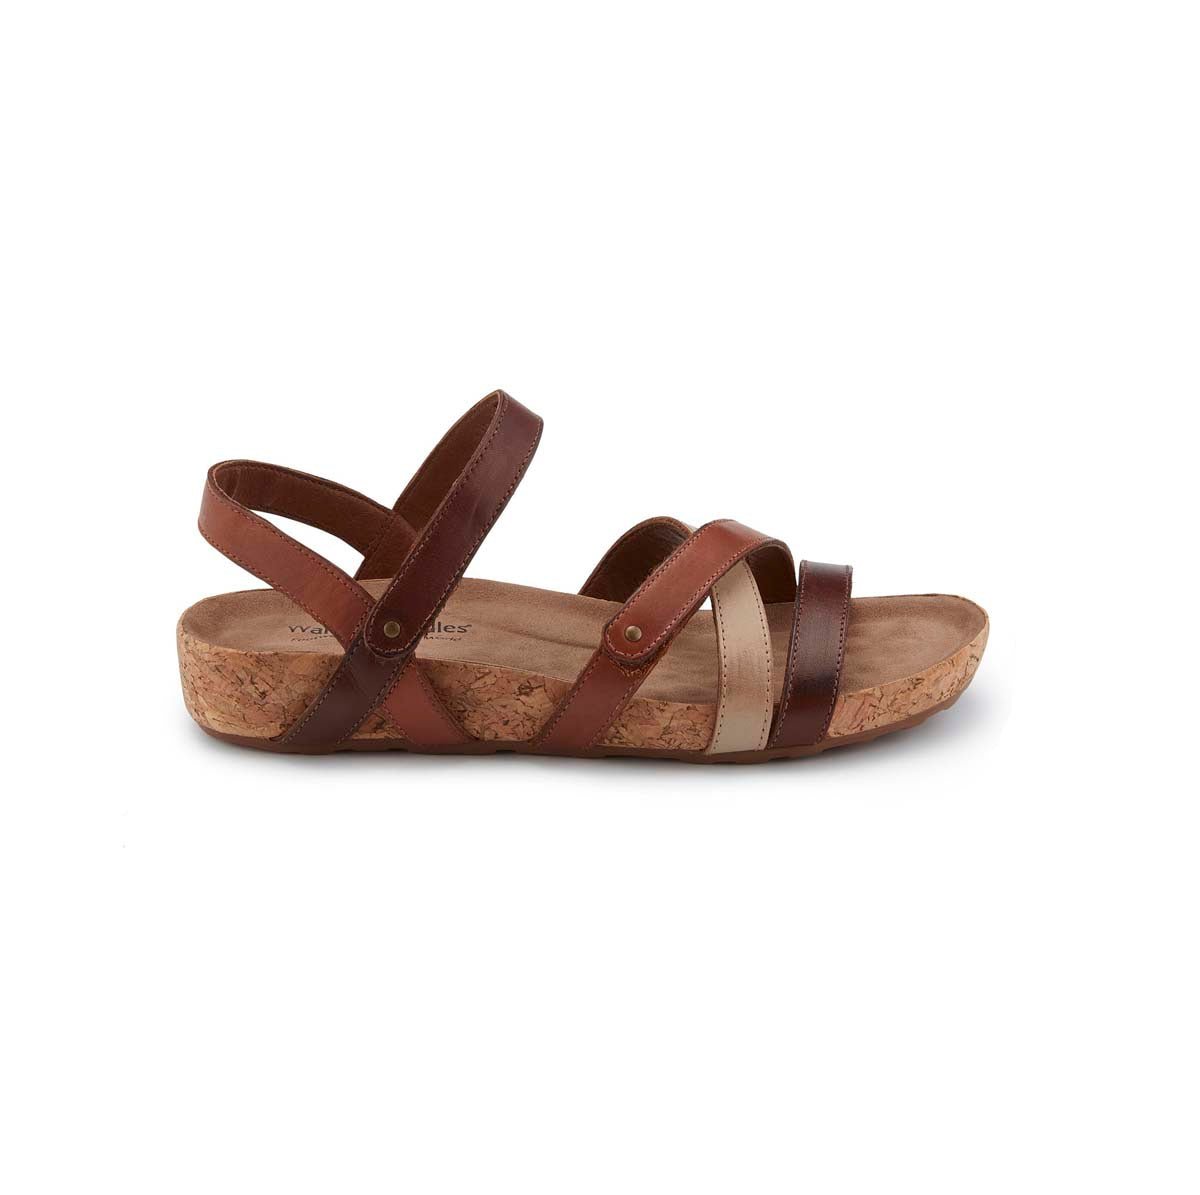 WALKING CRADLES WC POOL WOMEN STRAPPY SANDAL IN BROWN MULTI LEATHER/CORK - TLW Shoes